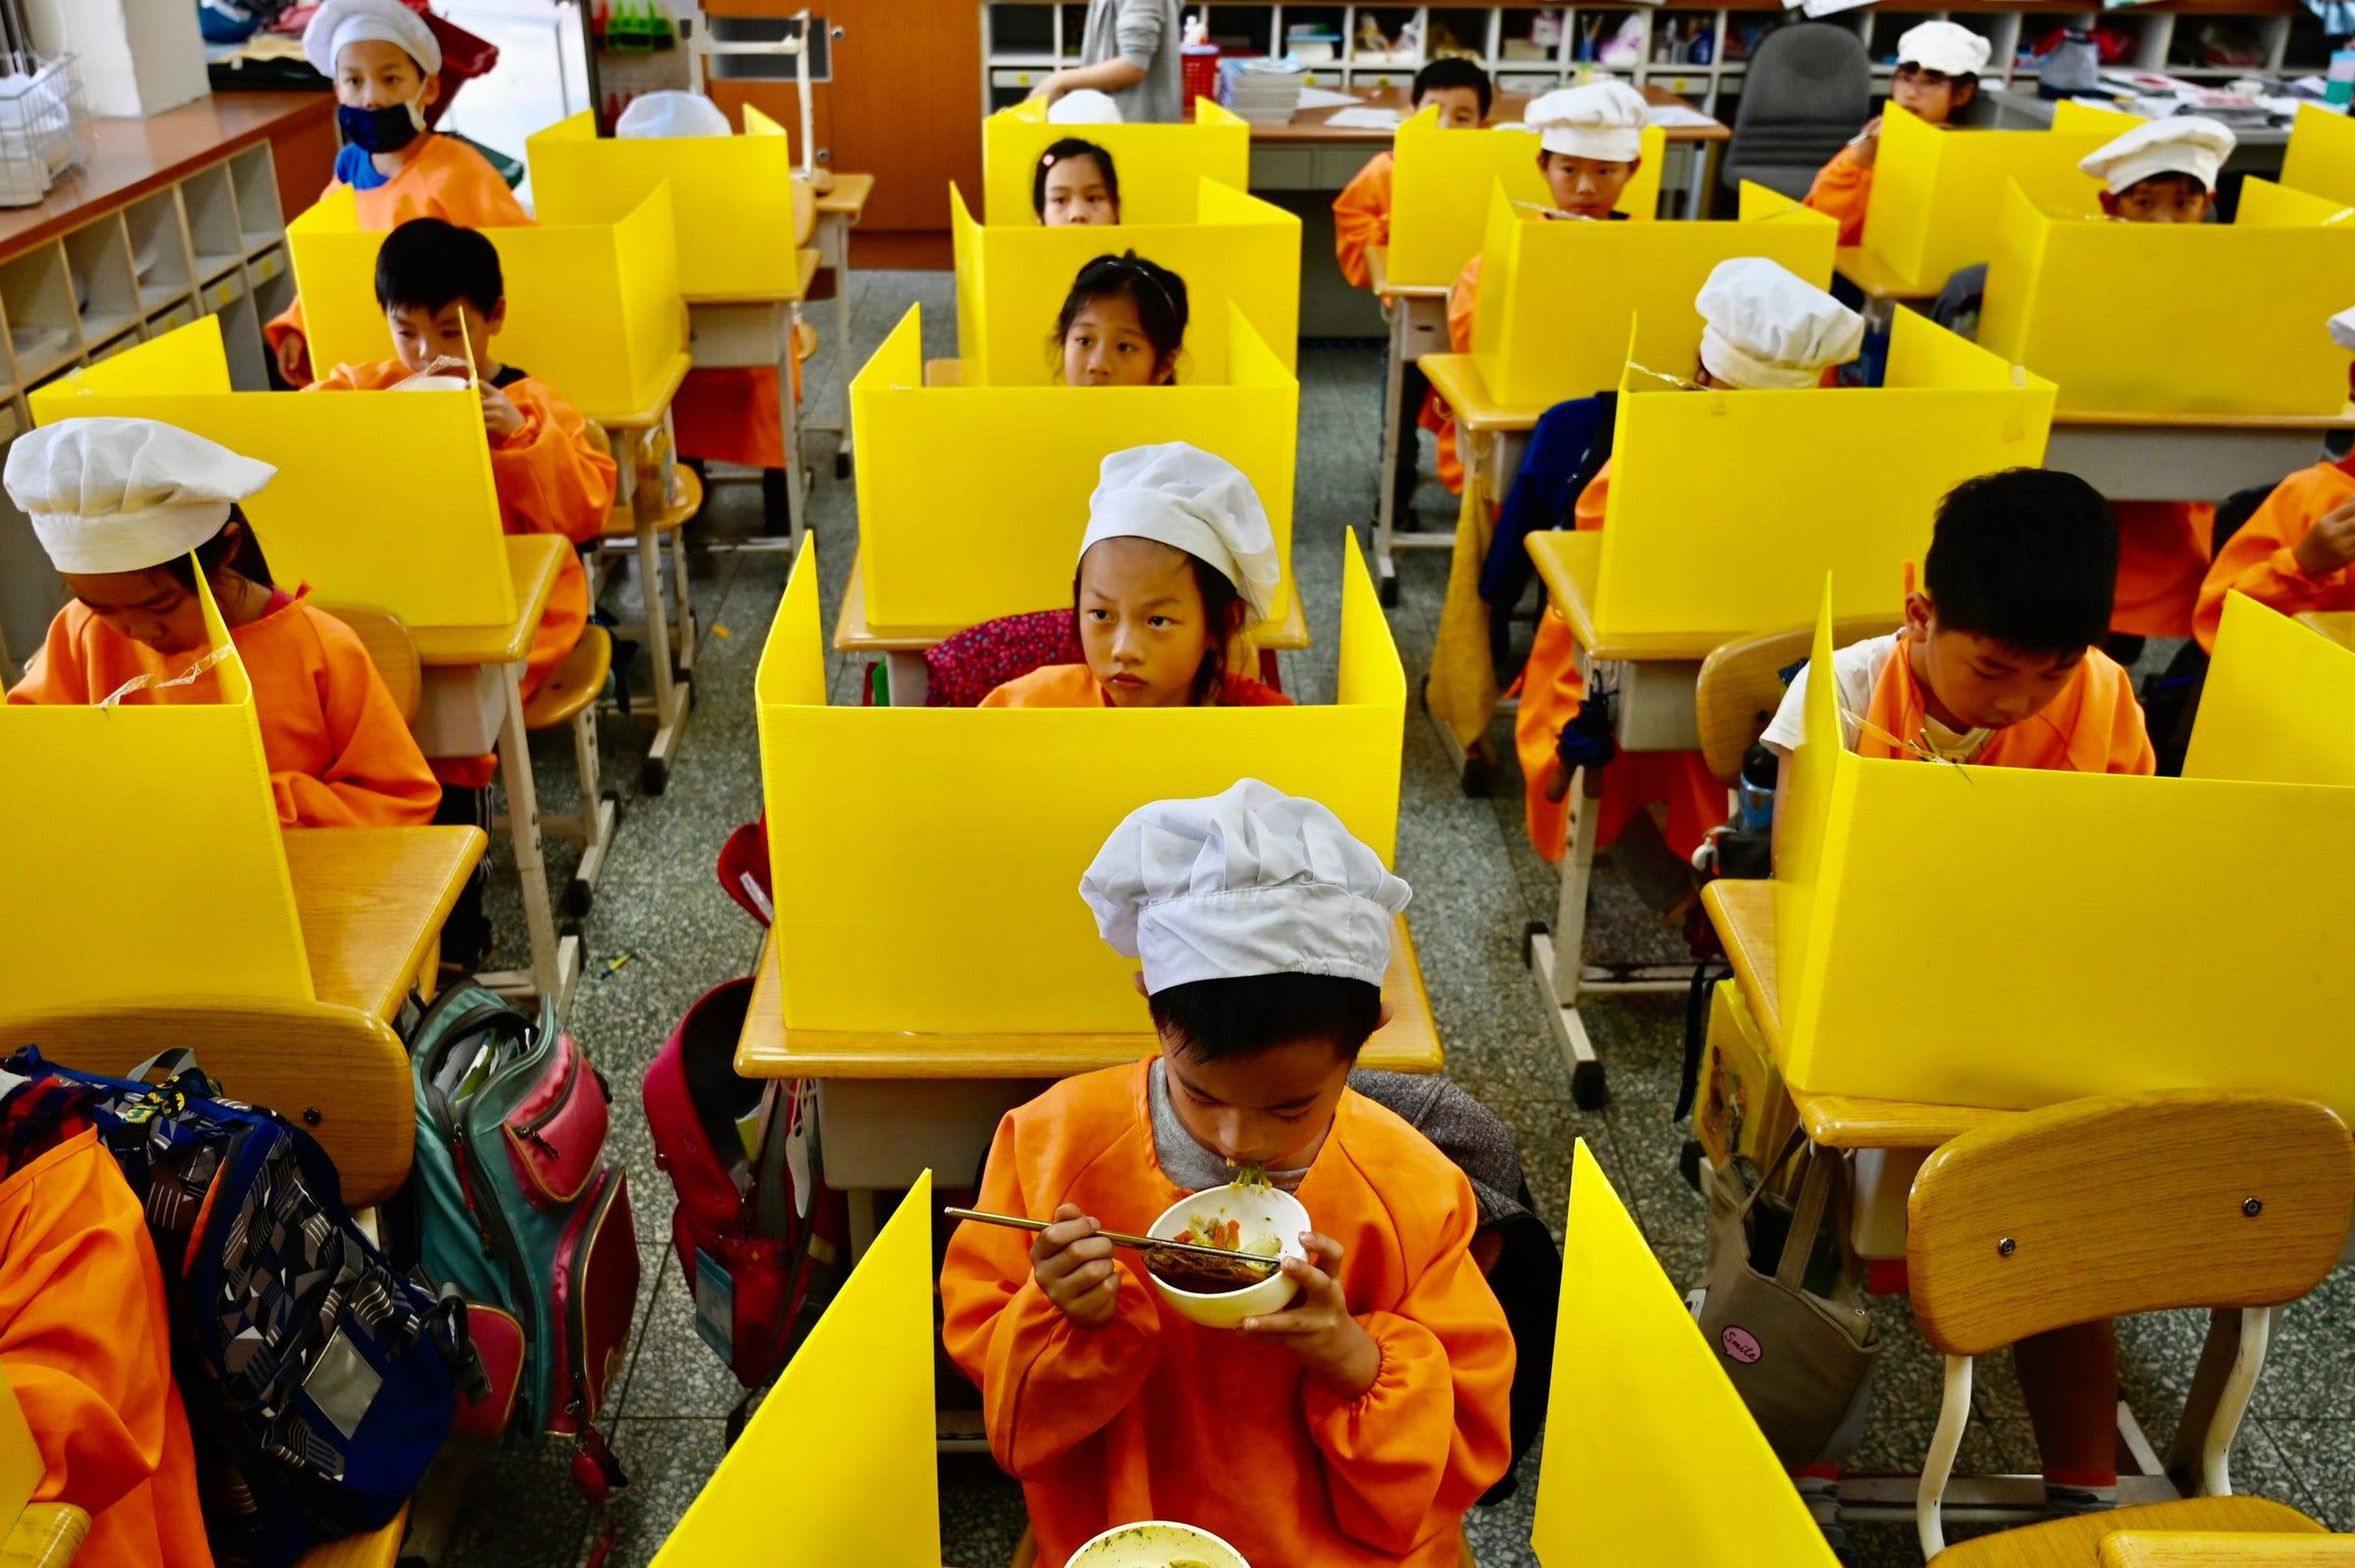 Students eat their lunch on desks with plastic partitions as a preventive measure to curb the spread of the COVID-19 coronavirus at Dajia Elementary School in Taipei on April 29, 2020.